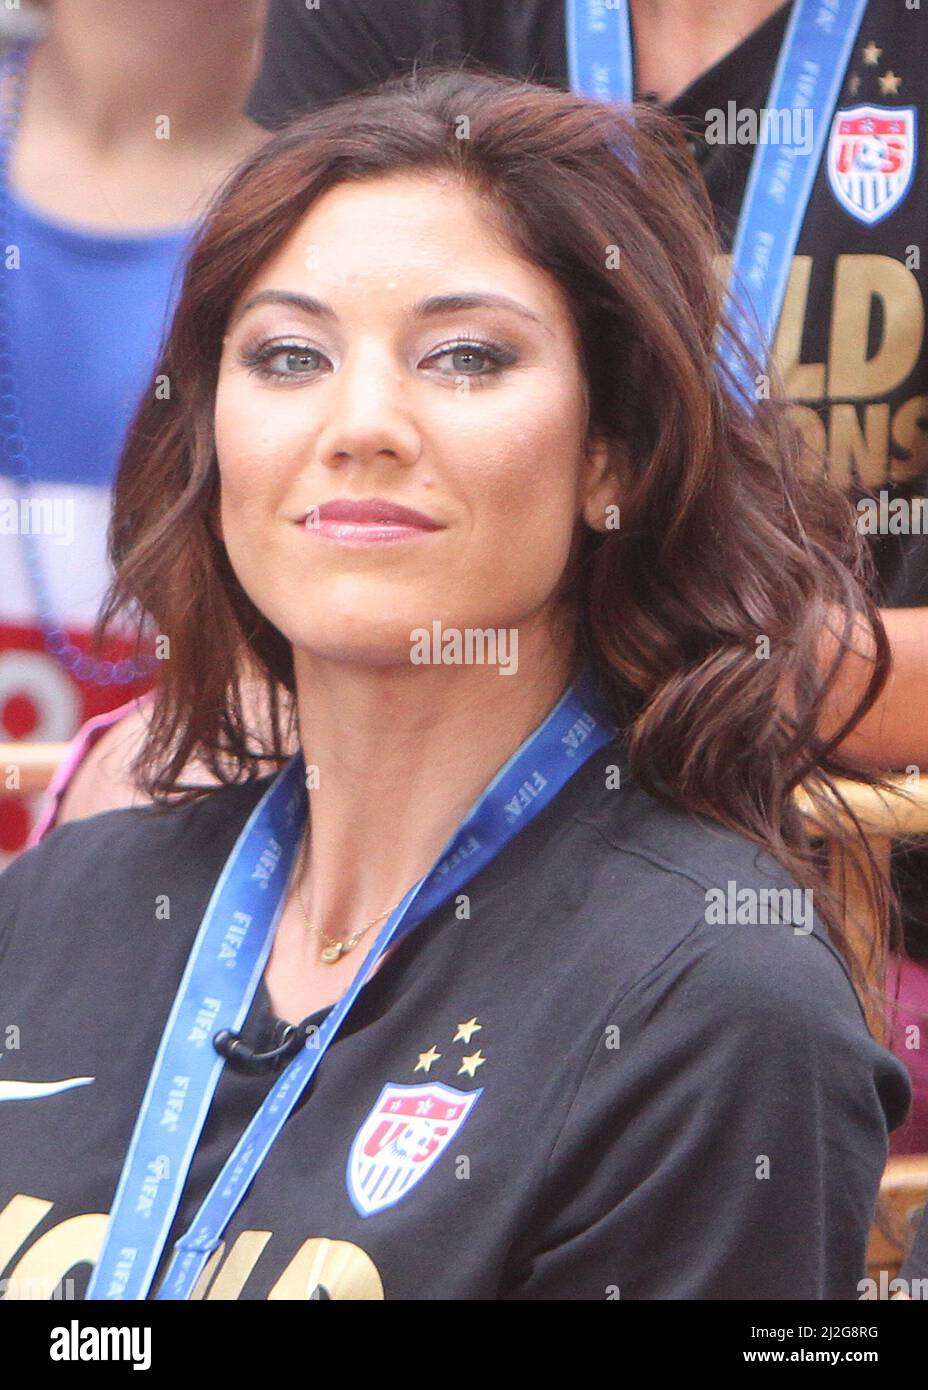 **FILE PHOTO** 1st Apr 2022. Hope Solo Arrested on DWI, Resisting Arrest And Misdemeanor Child Abuse. Photo taken: NEW YORK, NY - JULY 10: Hope Solo pictured as the U.S. Women's National Soccer Team visits ABC's Good Morning America before their celebratory parade at the Canyon Of Heroes in New York City on July 10, 2015. Credit: RW/MediaPunch Credit: MediaPunch Inc/Alamy Live News Stock Photo